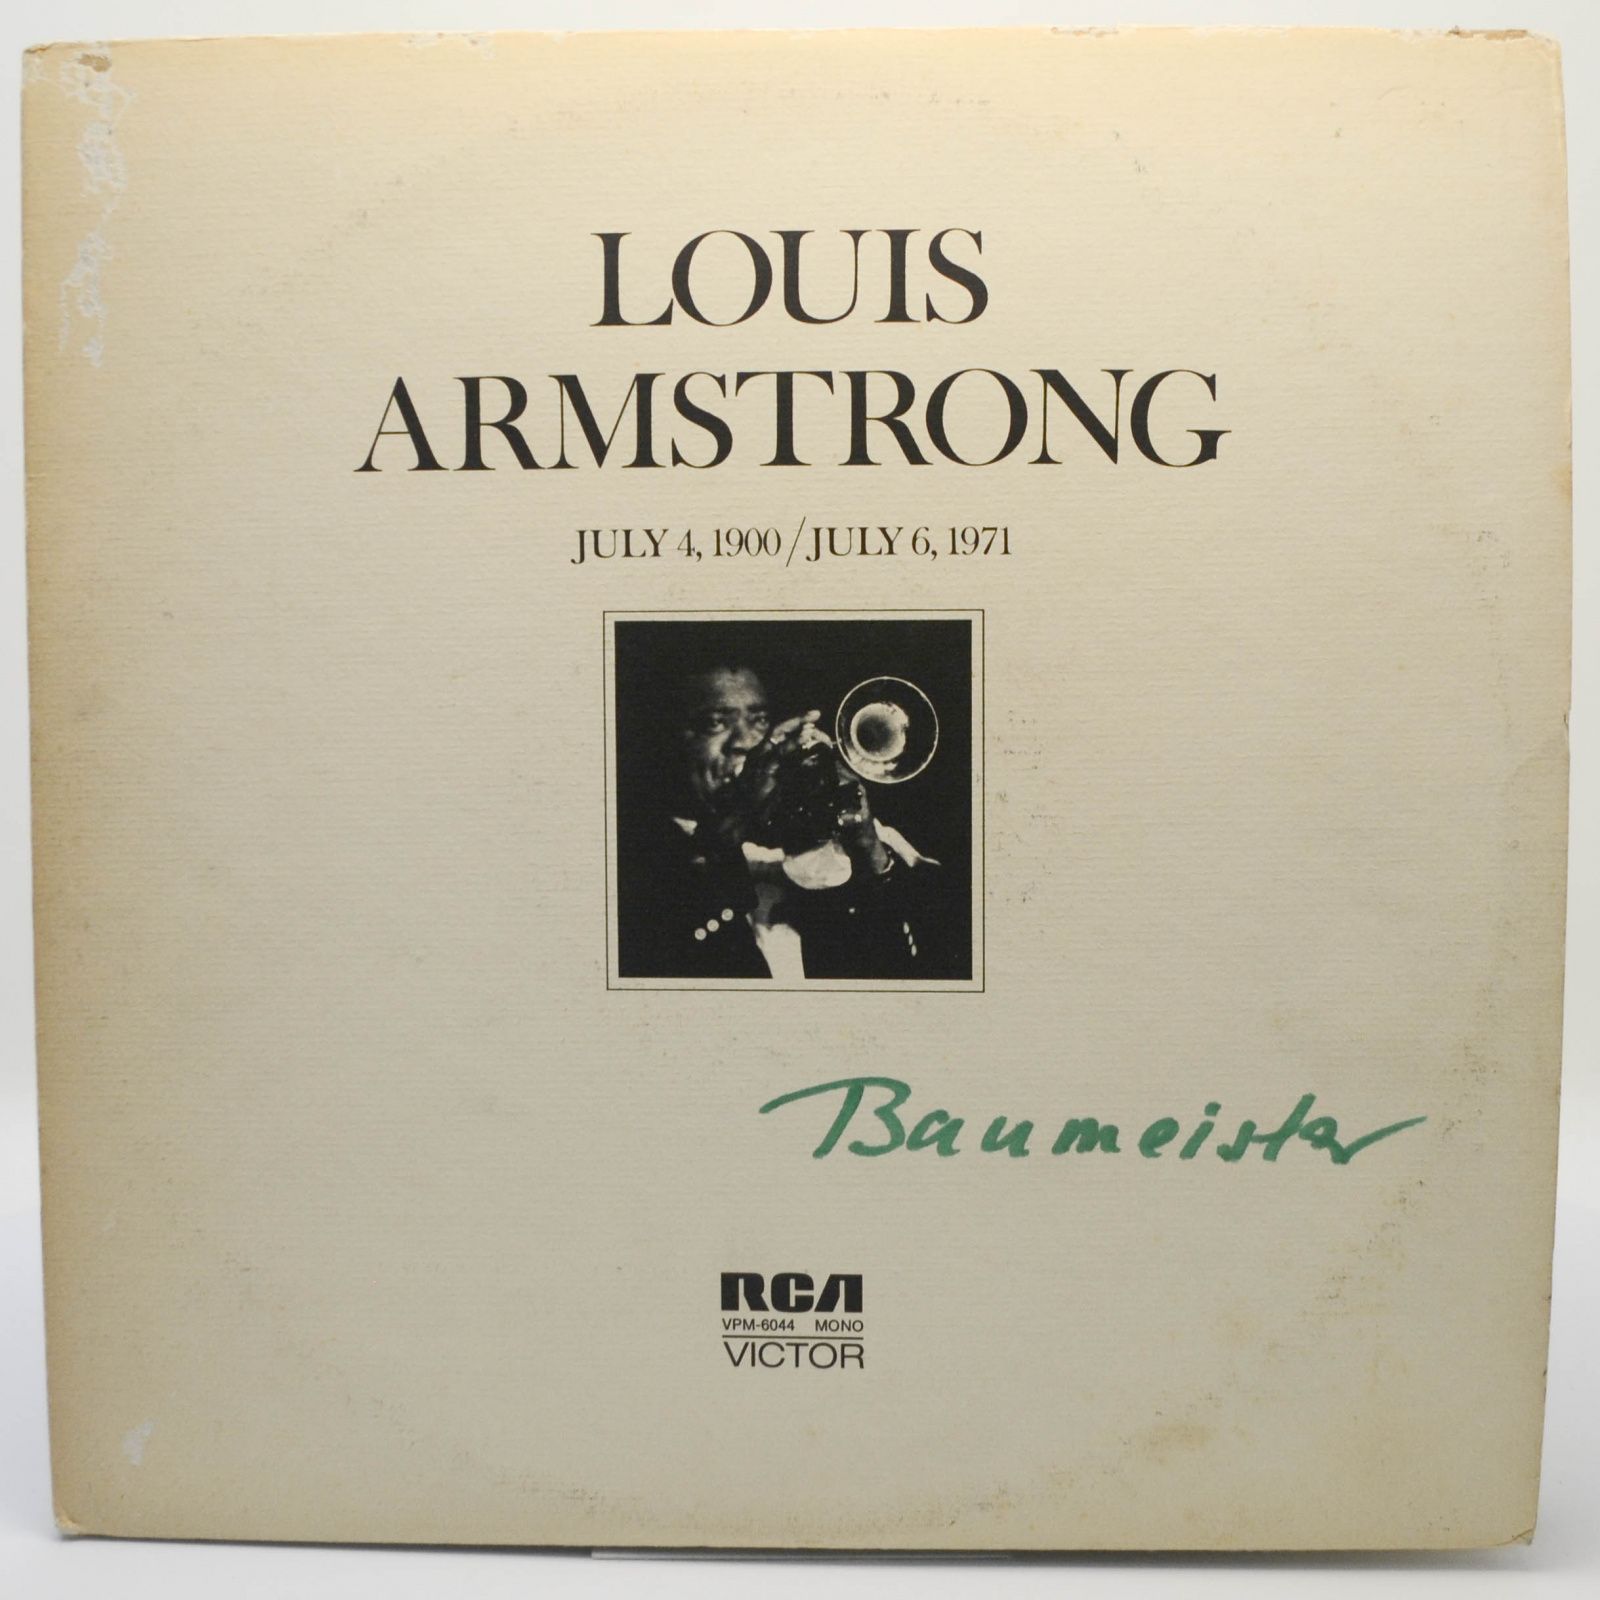 Louis Armstrong — July 4, 1900 - July 6 1971 (2LP), 1971